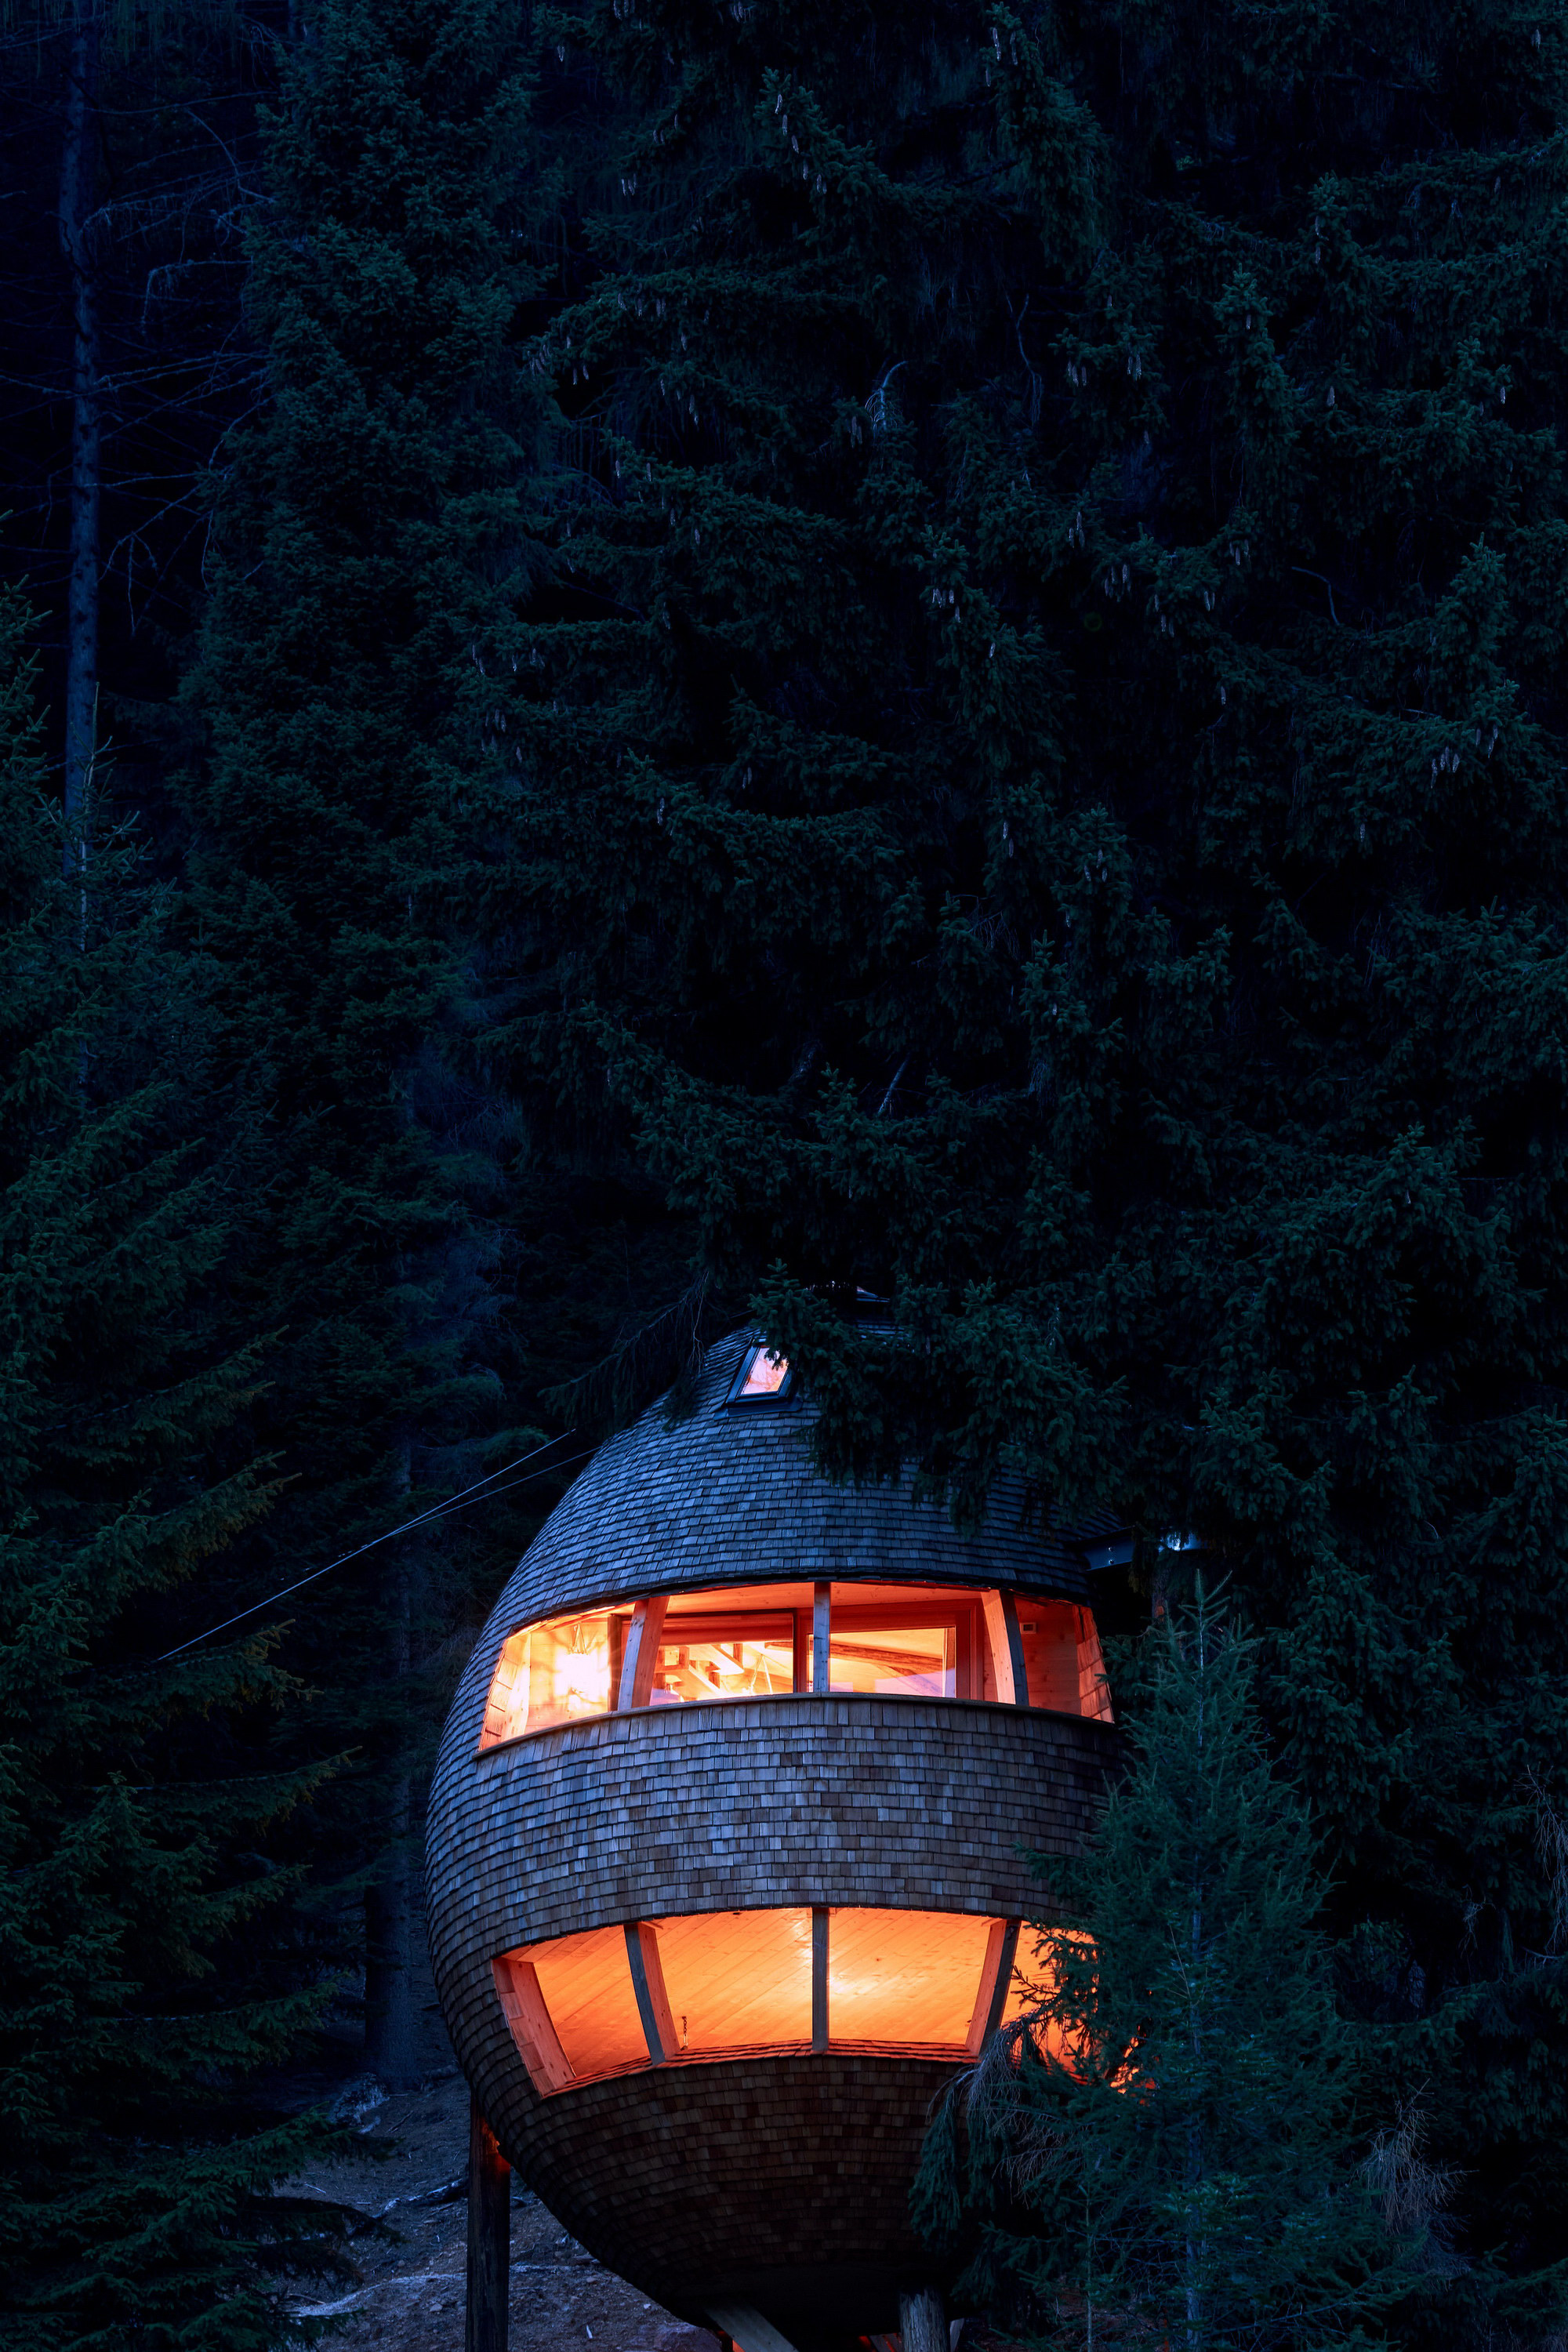 Pigna | Egg-Shaped Treehouses by Architetto Beltrame Claudio